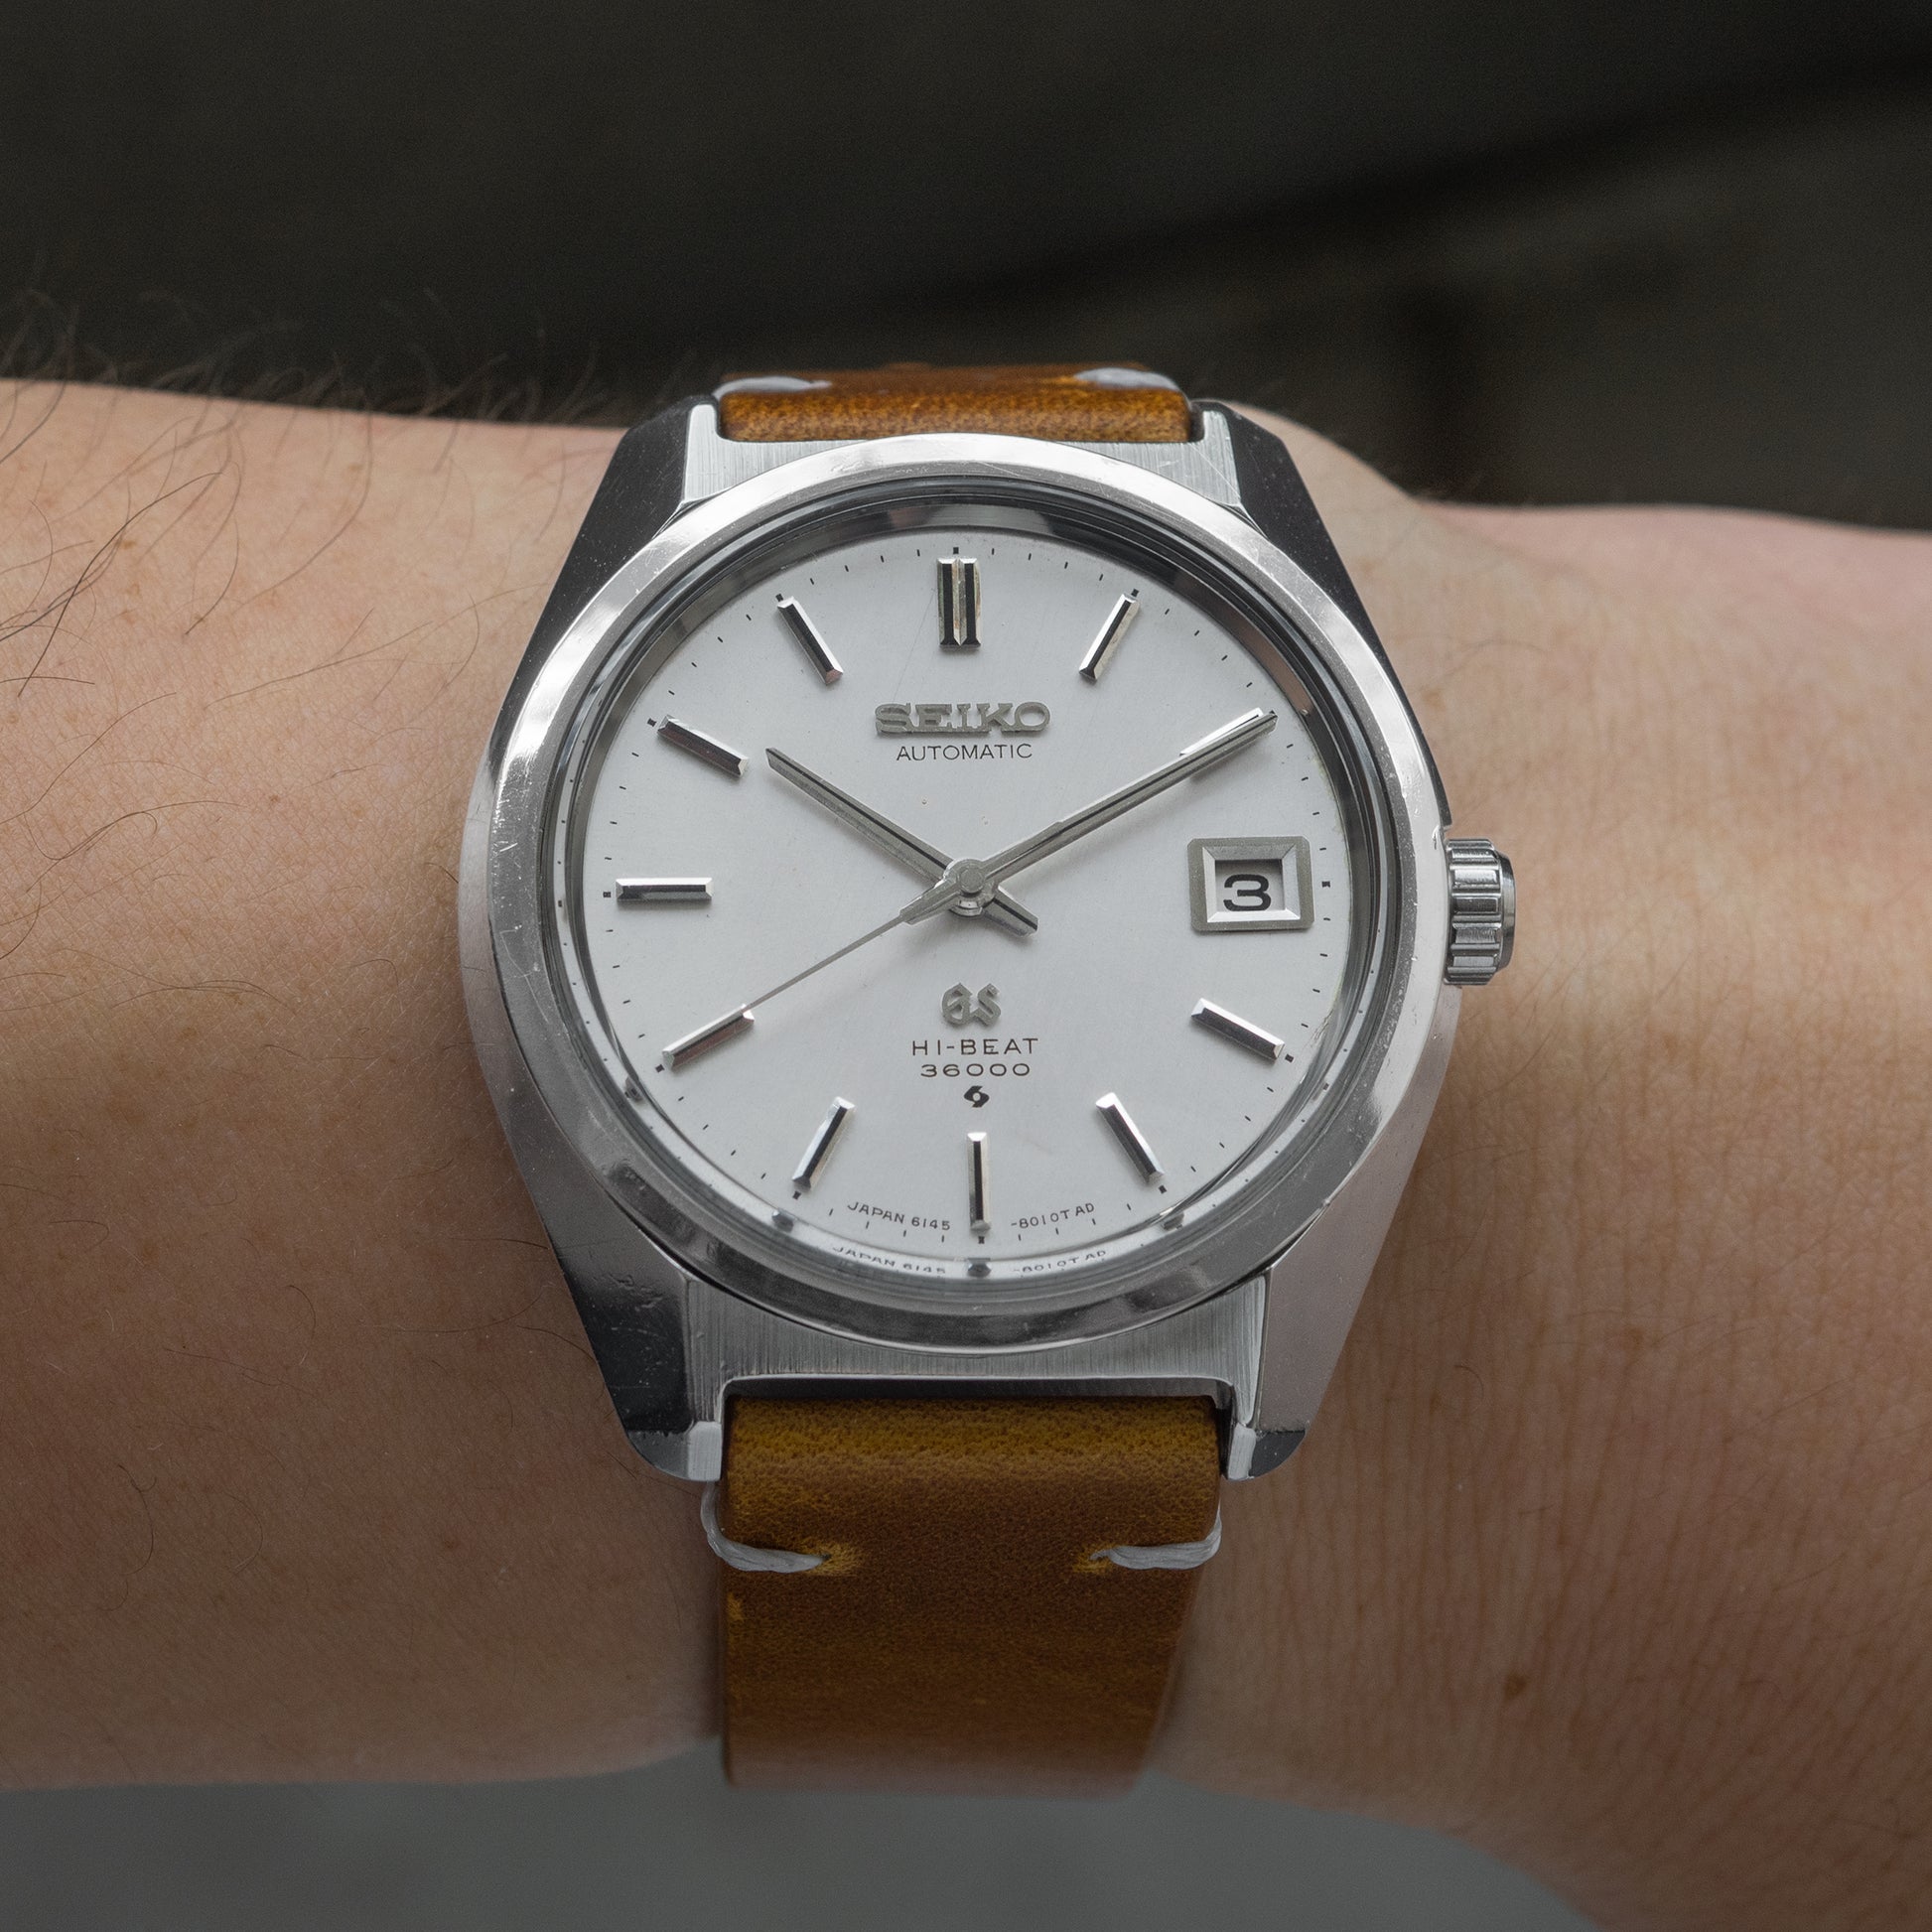 No. 372 / Grand Seiko 61GS HI-BEAT - 1968 – From Time To Times